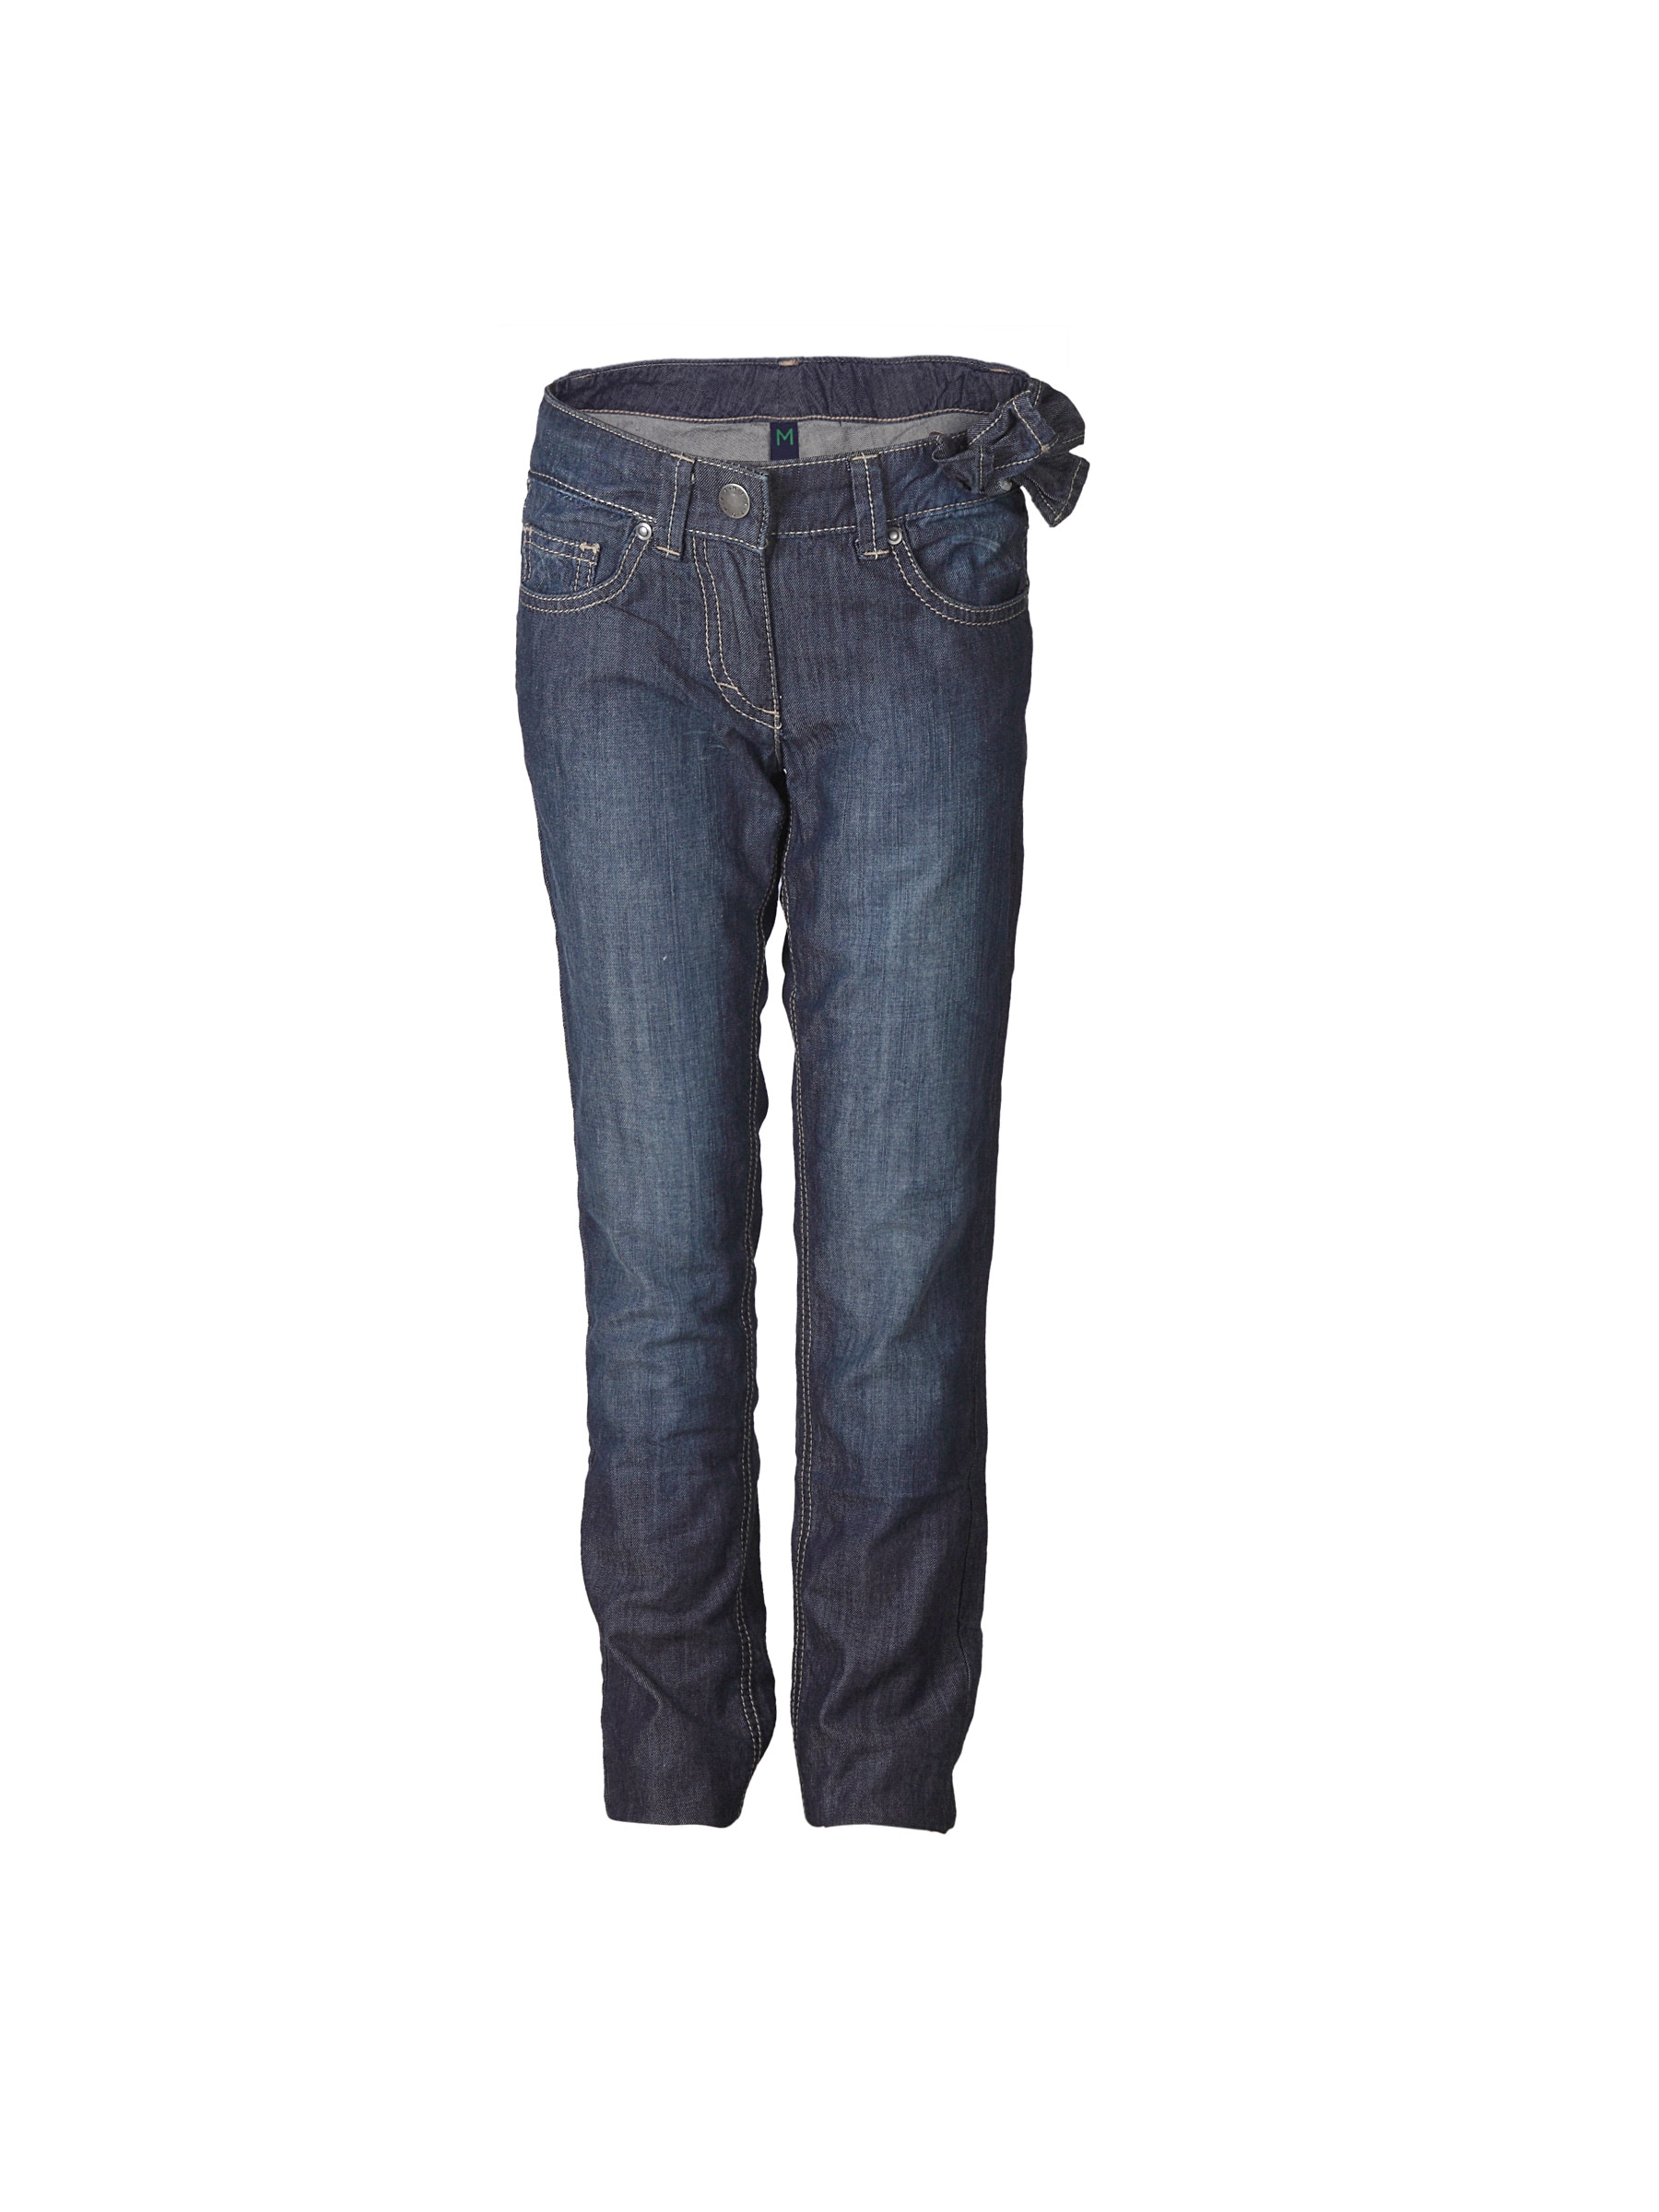 United Colors of Benetton Girls Blue Jeans